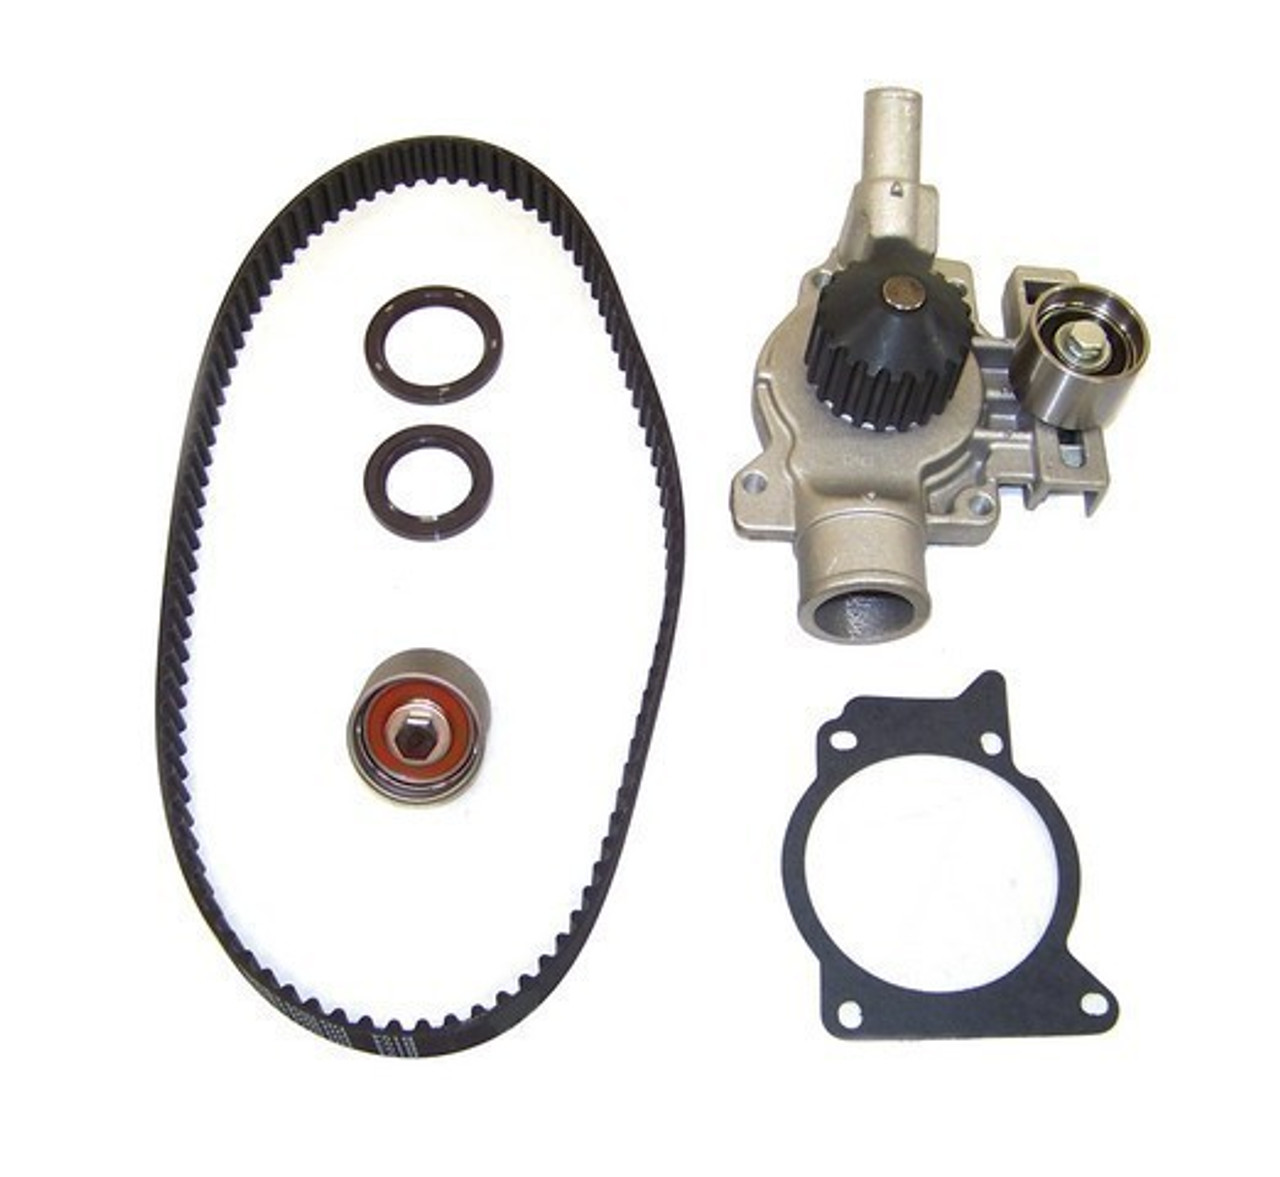 1995 Mercury Tracer 1.9L Engine Timing Belt Kit with Water Pump TBK4125WP -9